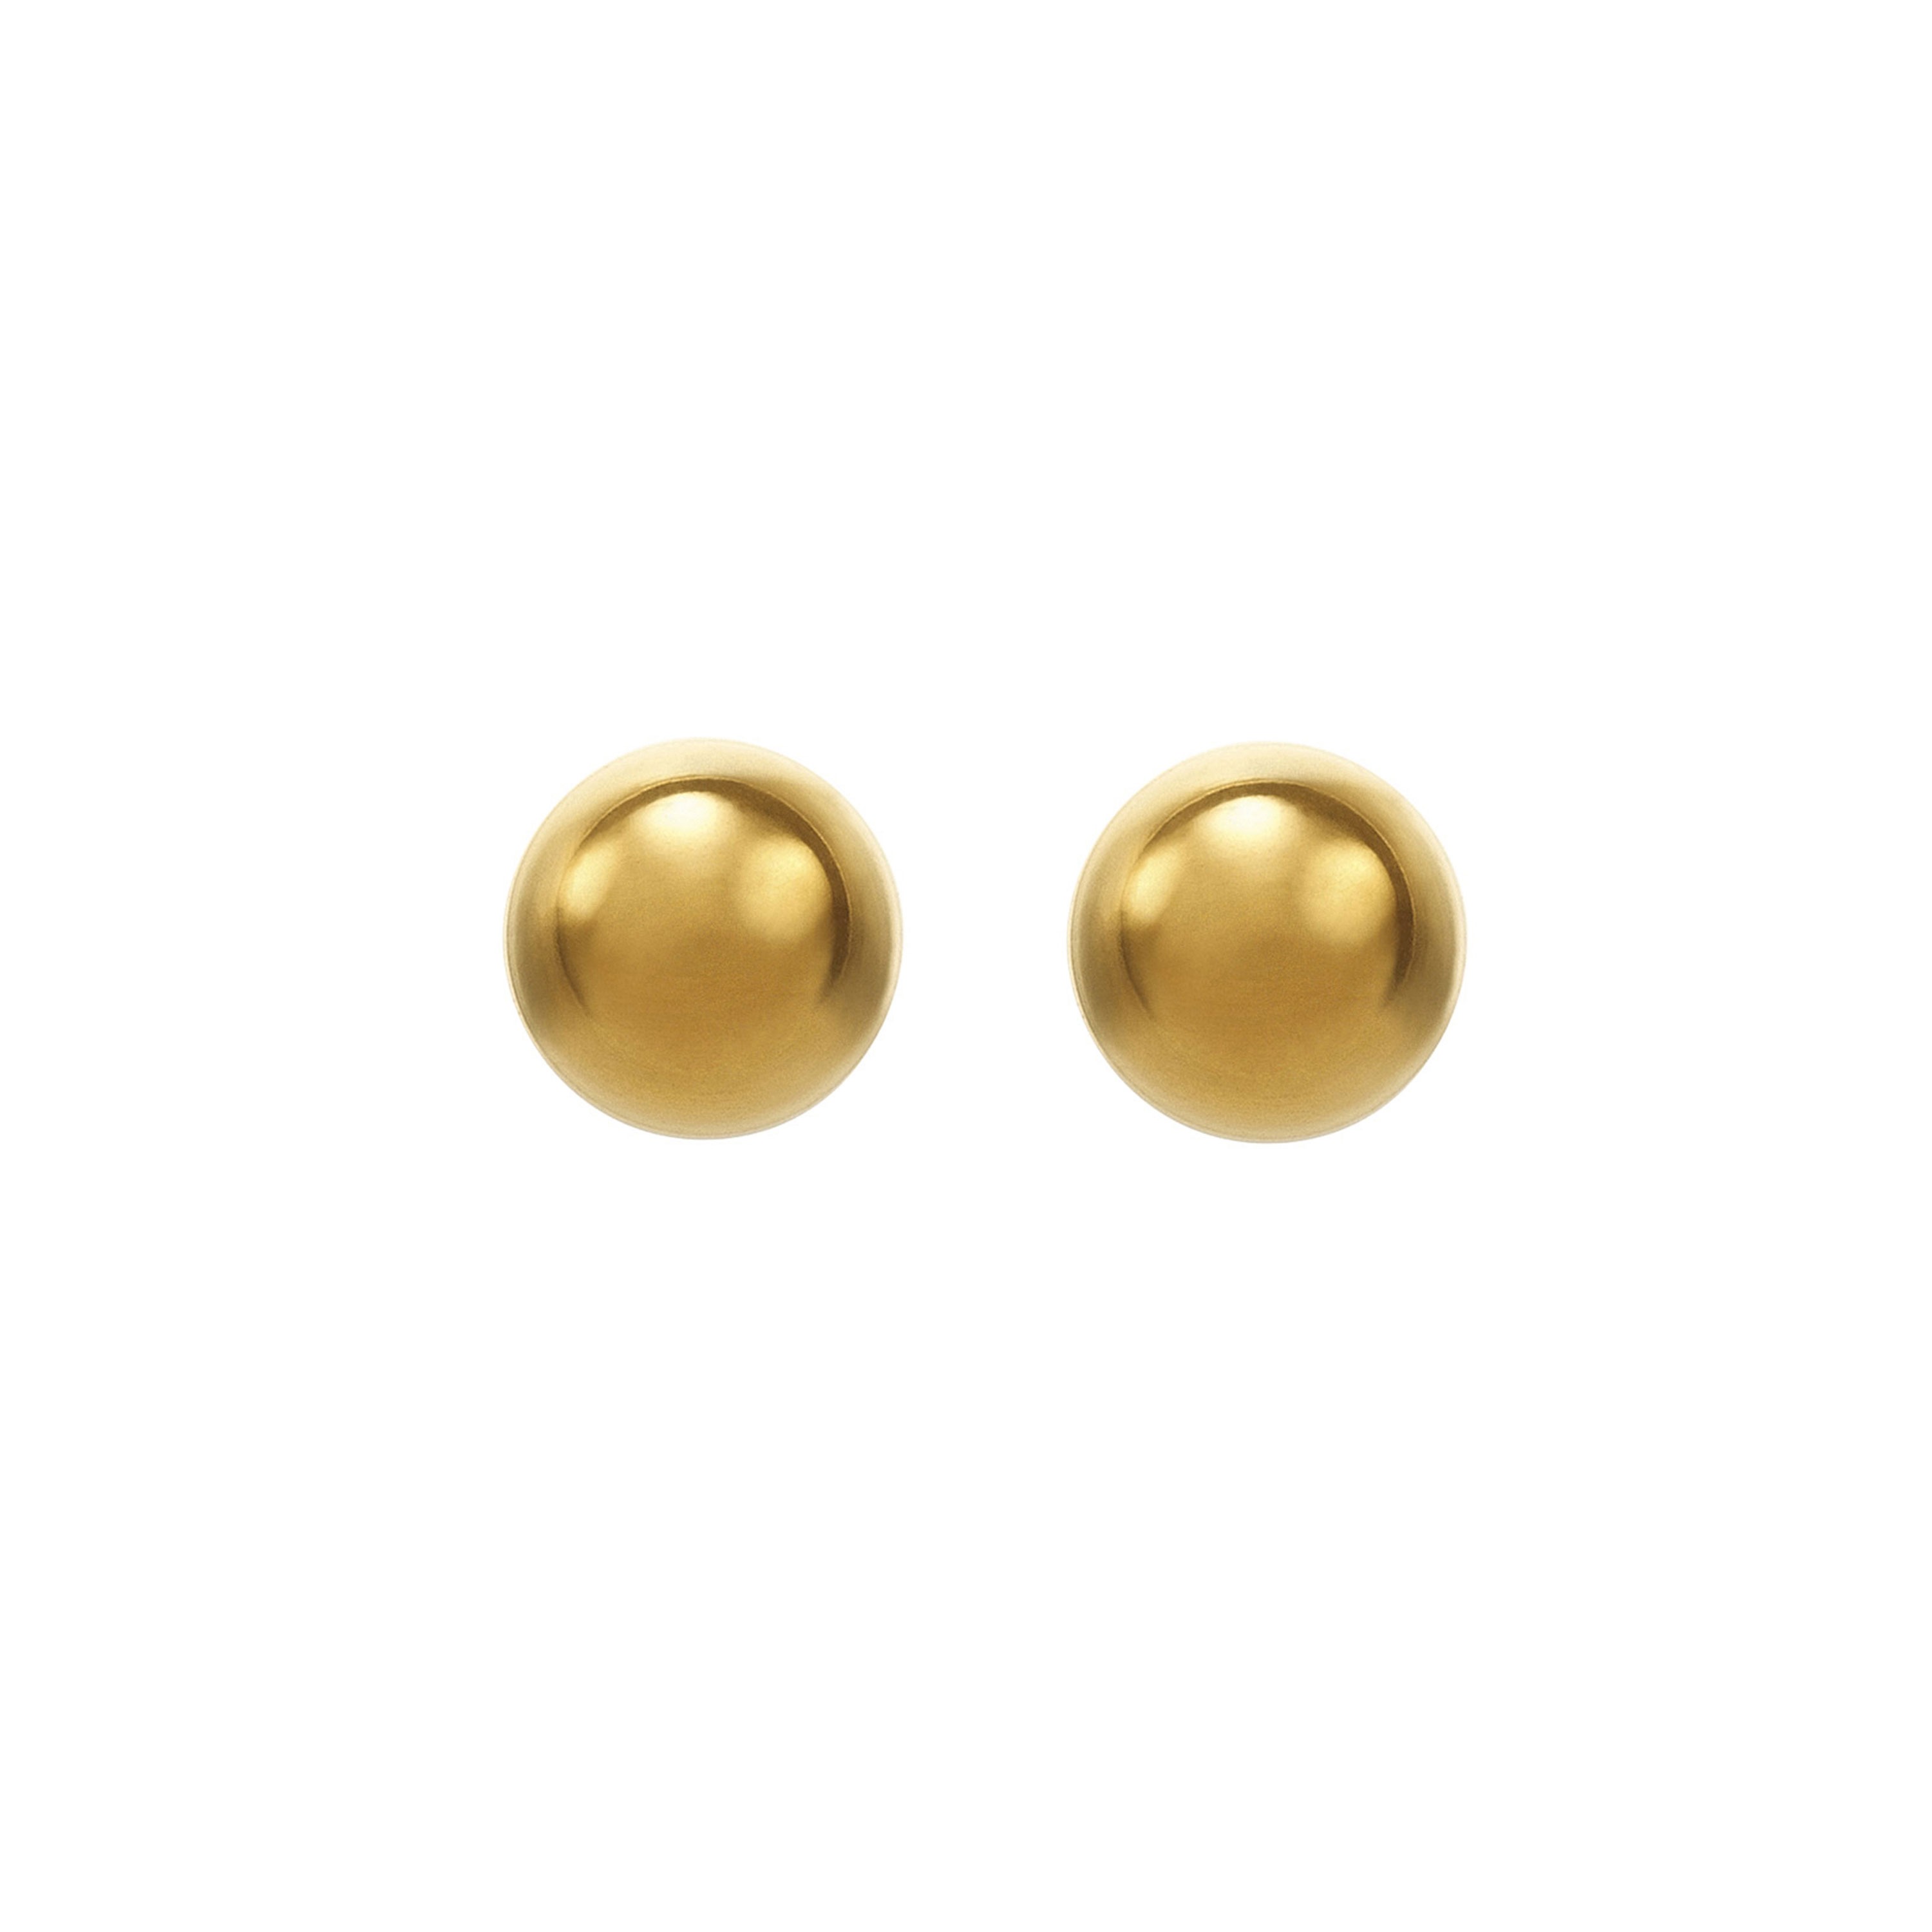 4MM - Ball | 24K Pure Gold-Plated Piercing Earrings with Ear Piercing Cartridge | Studex System75